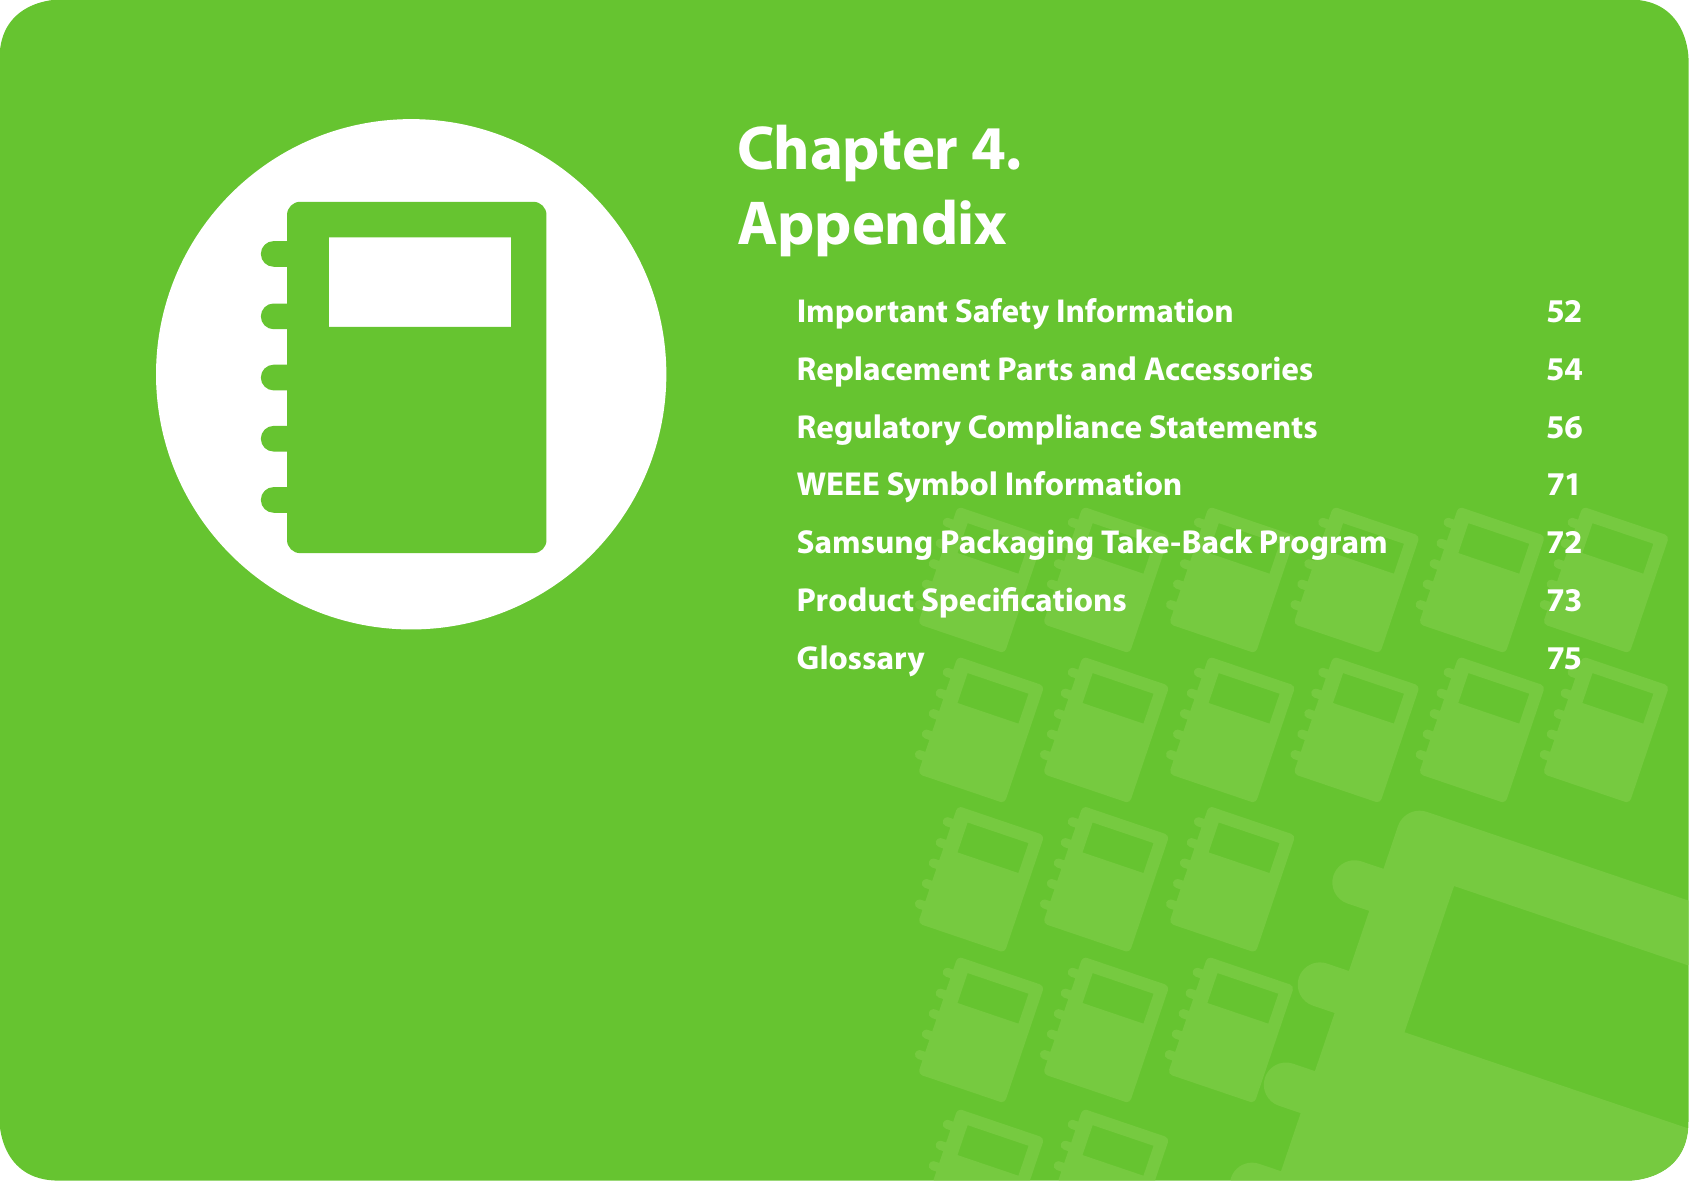  Chapter 4. AppendixImportant Safety Information  52Replacement Parts and Accessories  54Regulatory Compliance Statements  56WEEE Symbol Information  71Samsung Packaging Take-Back Program  72Product Speci cations  73Glossary  75